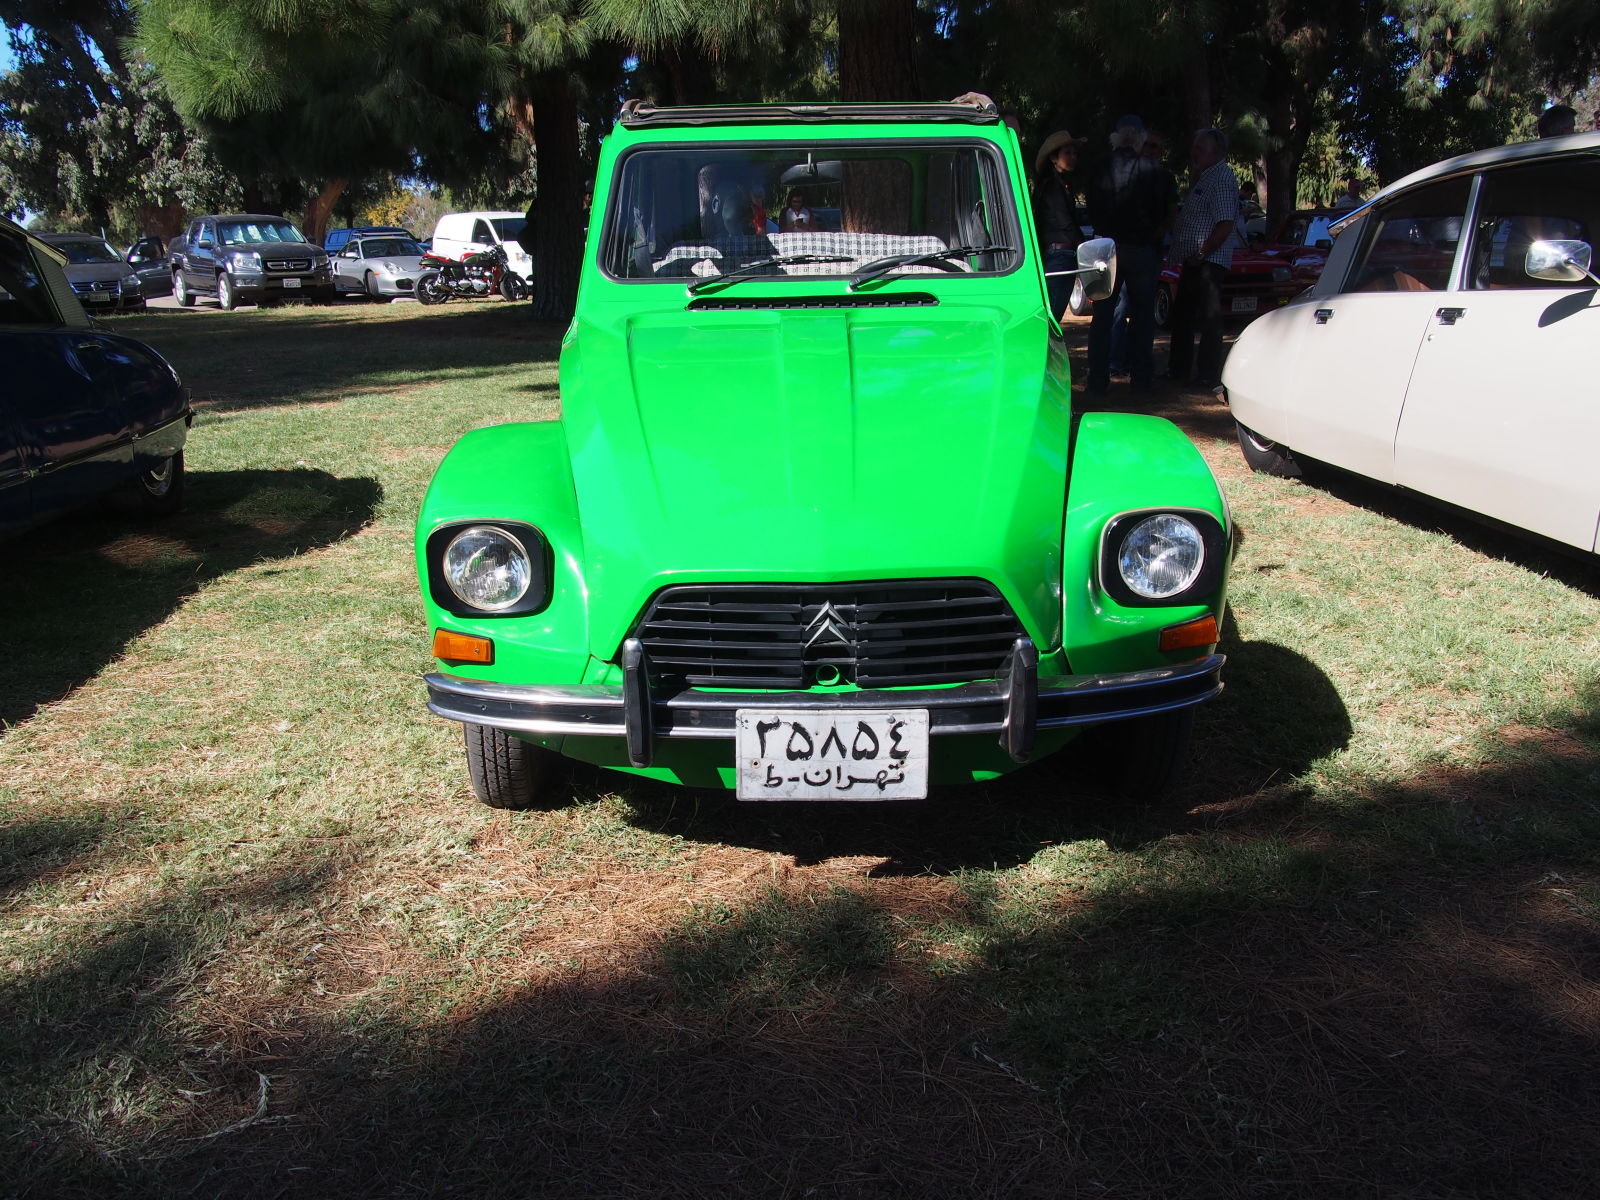 This is an Iranian built Citroën Dyane. It was actually called the Jyane over there. I don’t know why.